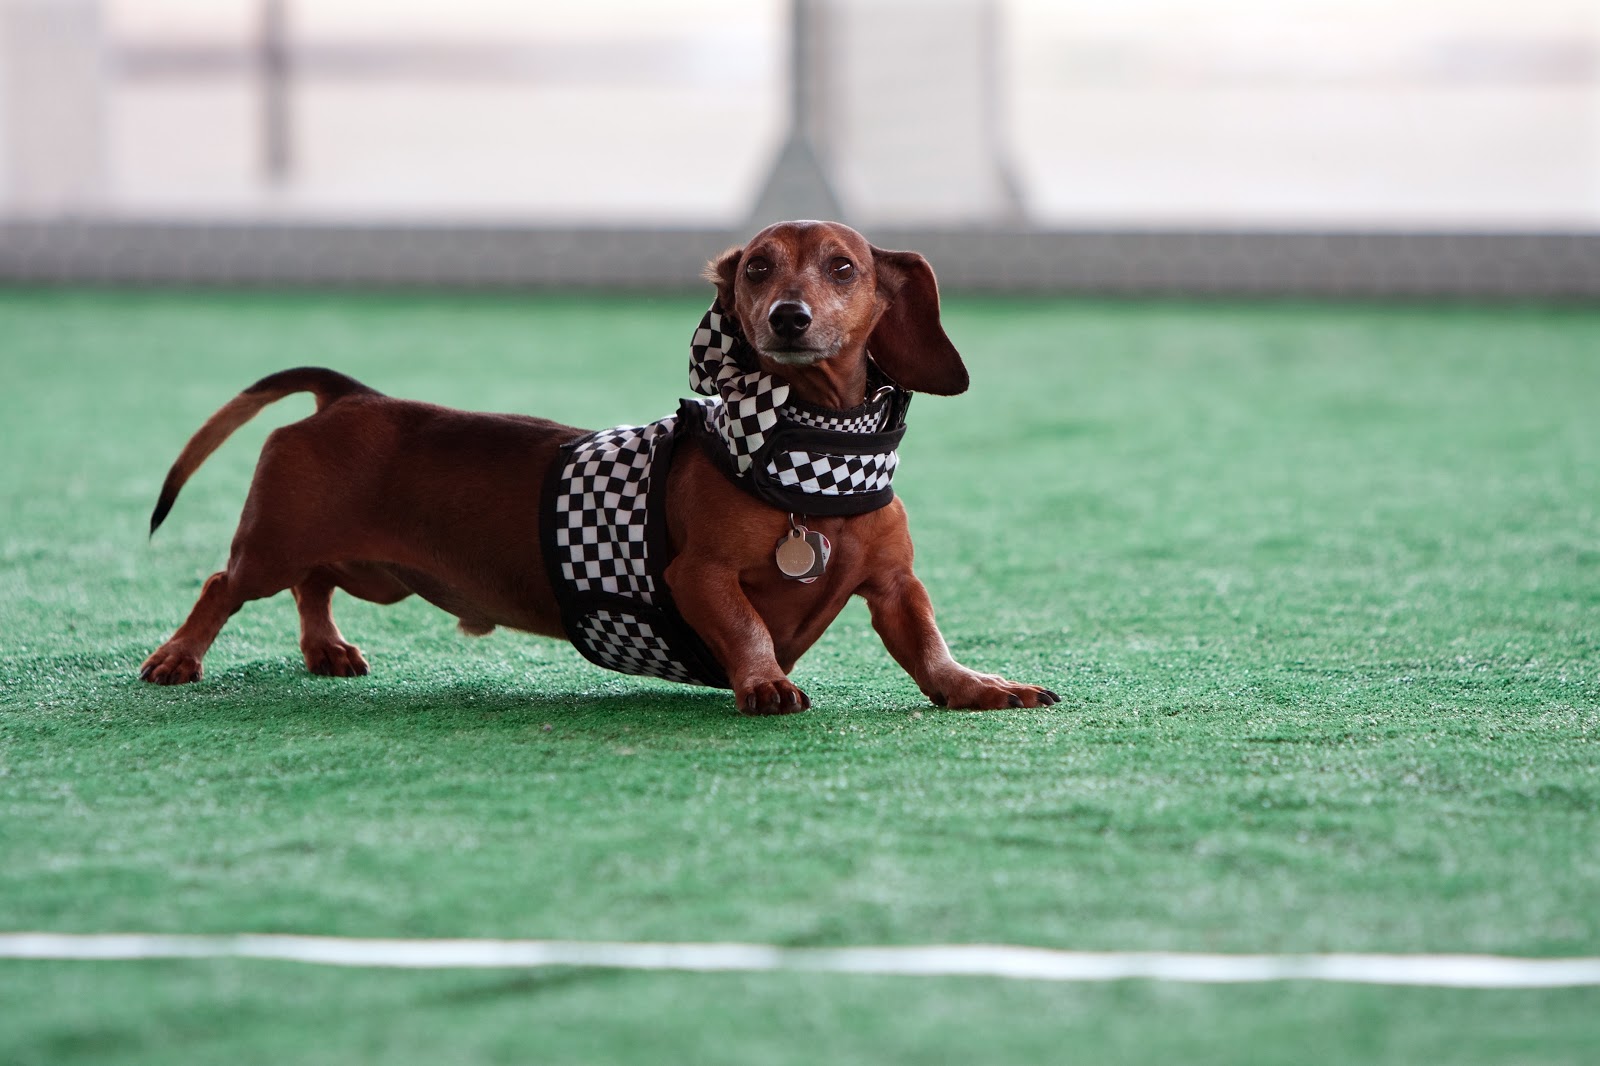 Artificial turf is a clean alternative to grass that makes it easy to dispose of pet waste 